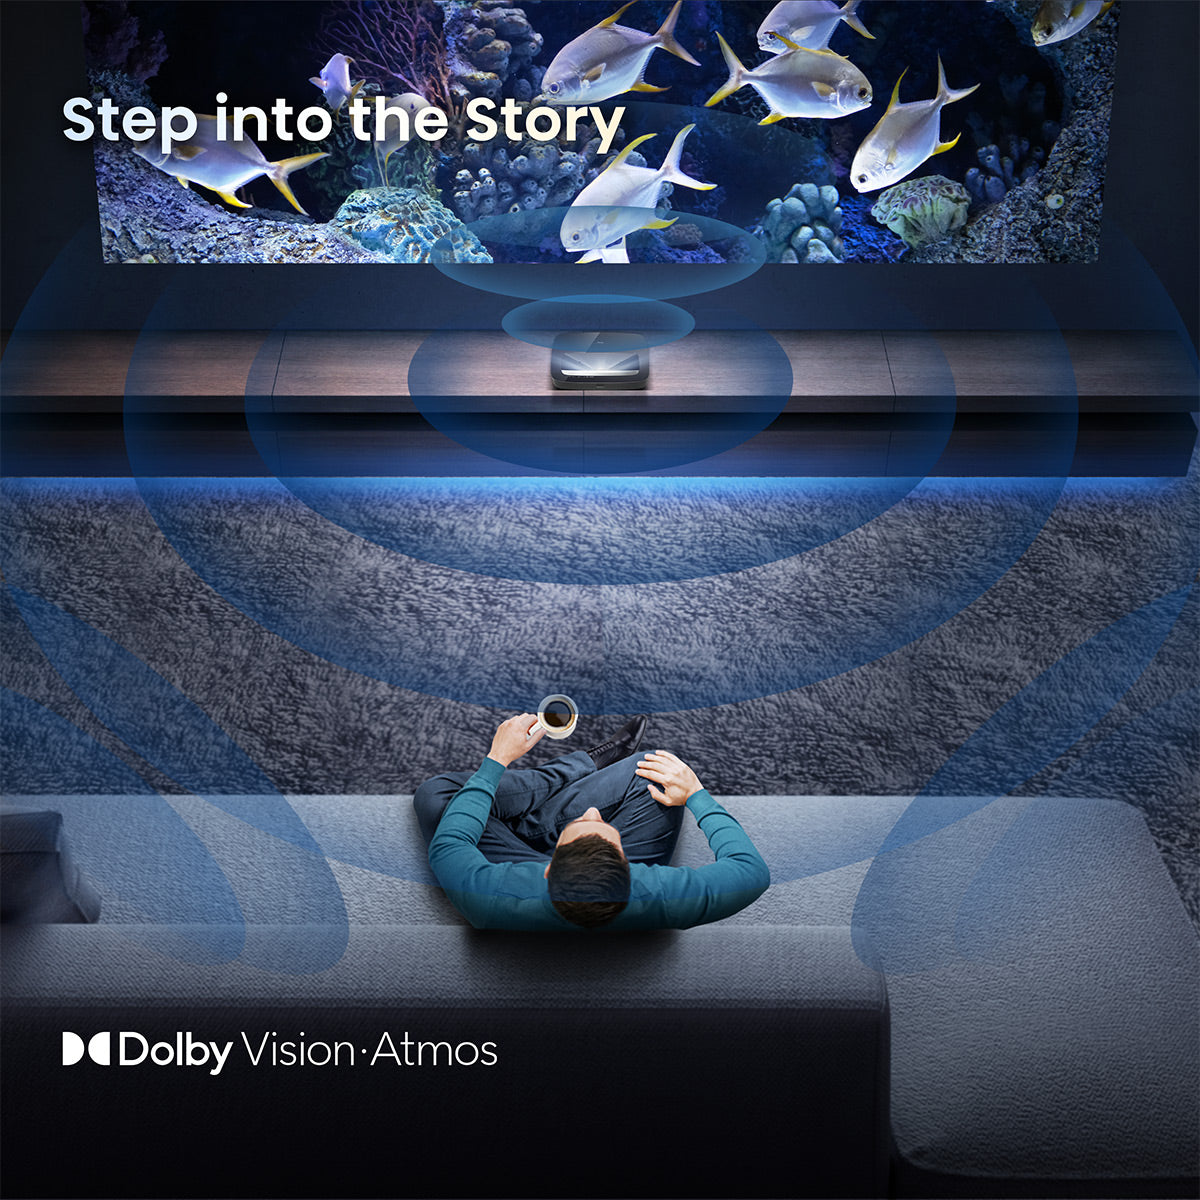 Google Stereo Laser Vision, Atmos, PL1 Dolby 4K X-Fusion Projector Cinema Hisense & World with Throw TV Ultra Short | Dolby Wide